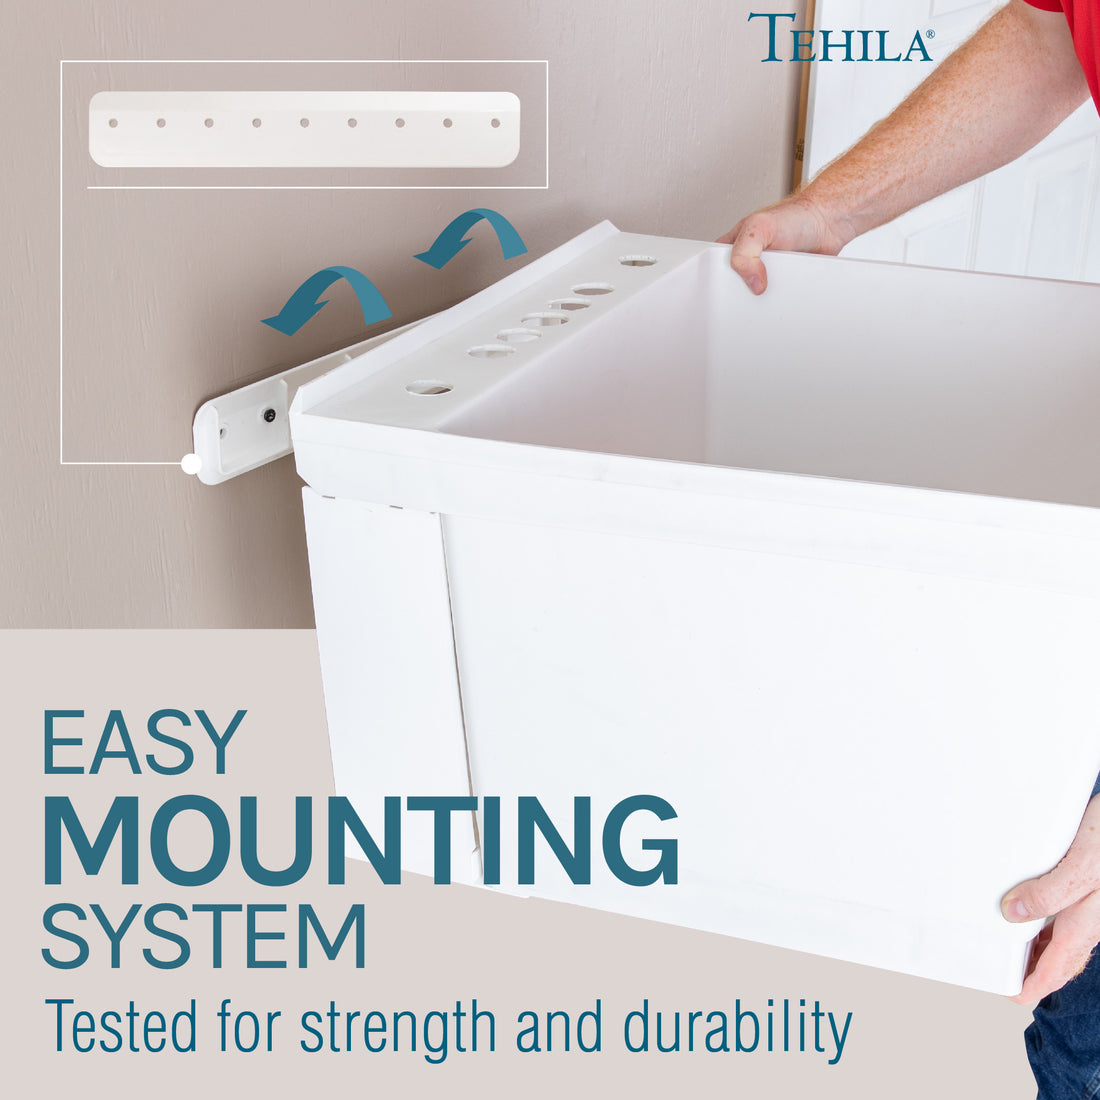 White Standard Utility Sink Easy Mounting System Tested for Strength and durability